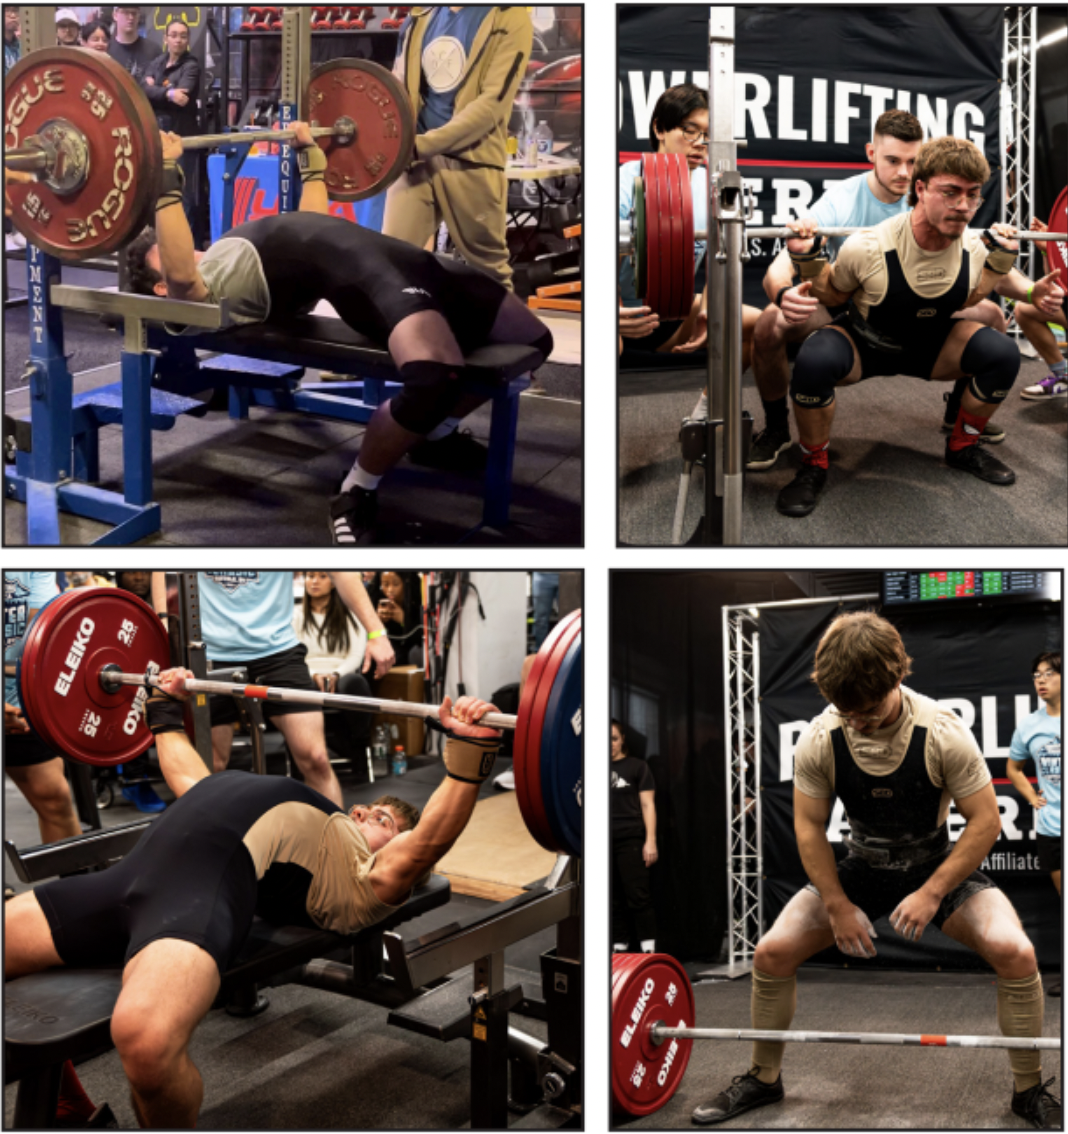 East+seniors+Max+Swartz+%28top+left%29+and+Elliot+Sykes+compete+in+powerlifting+competitions.